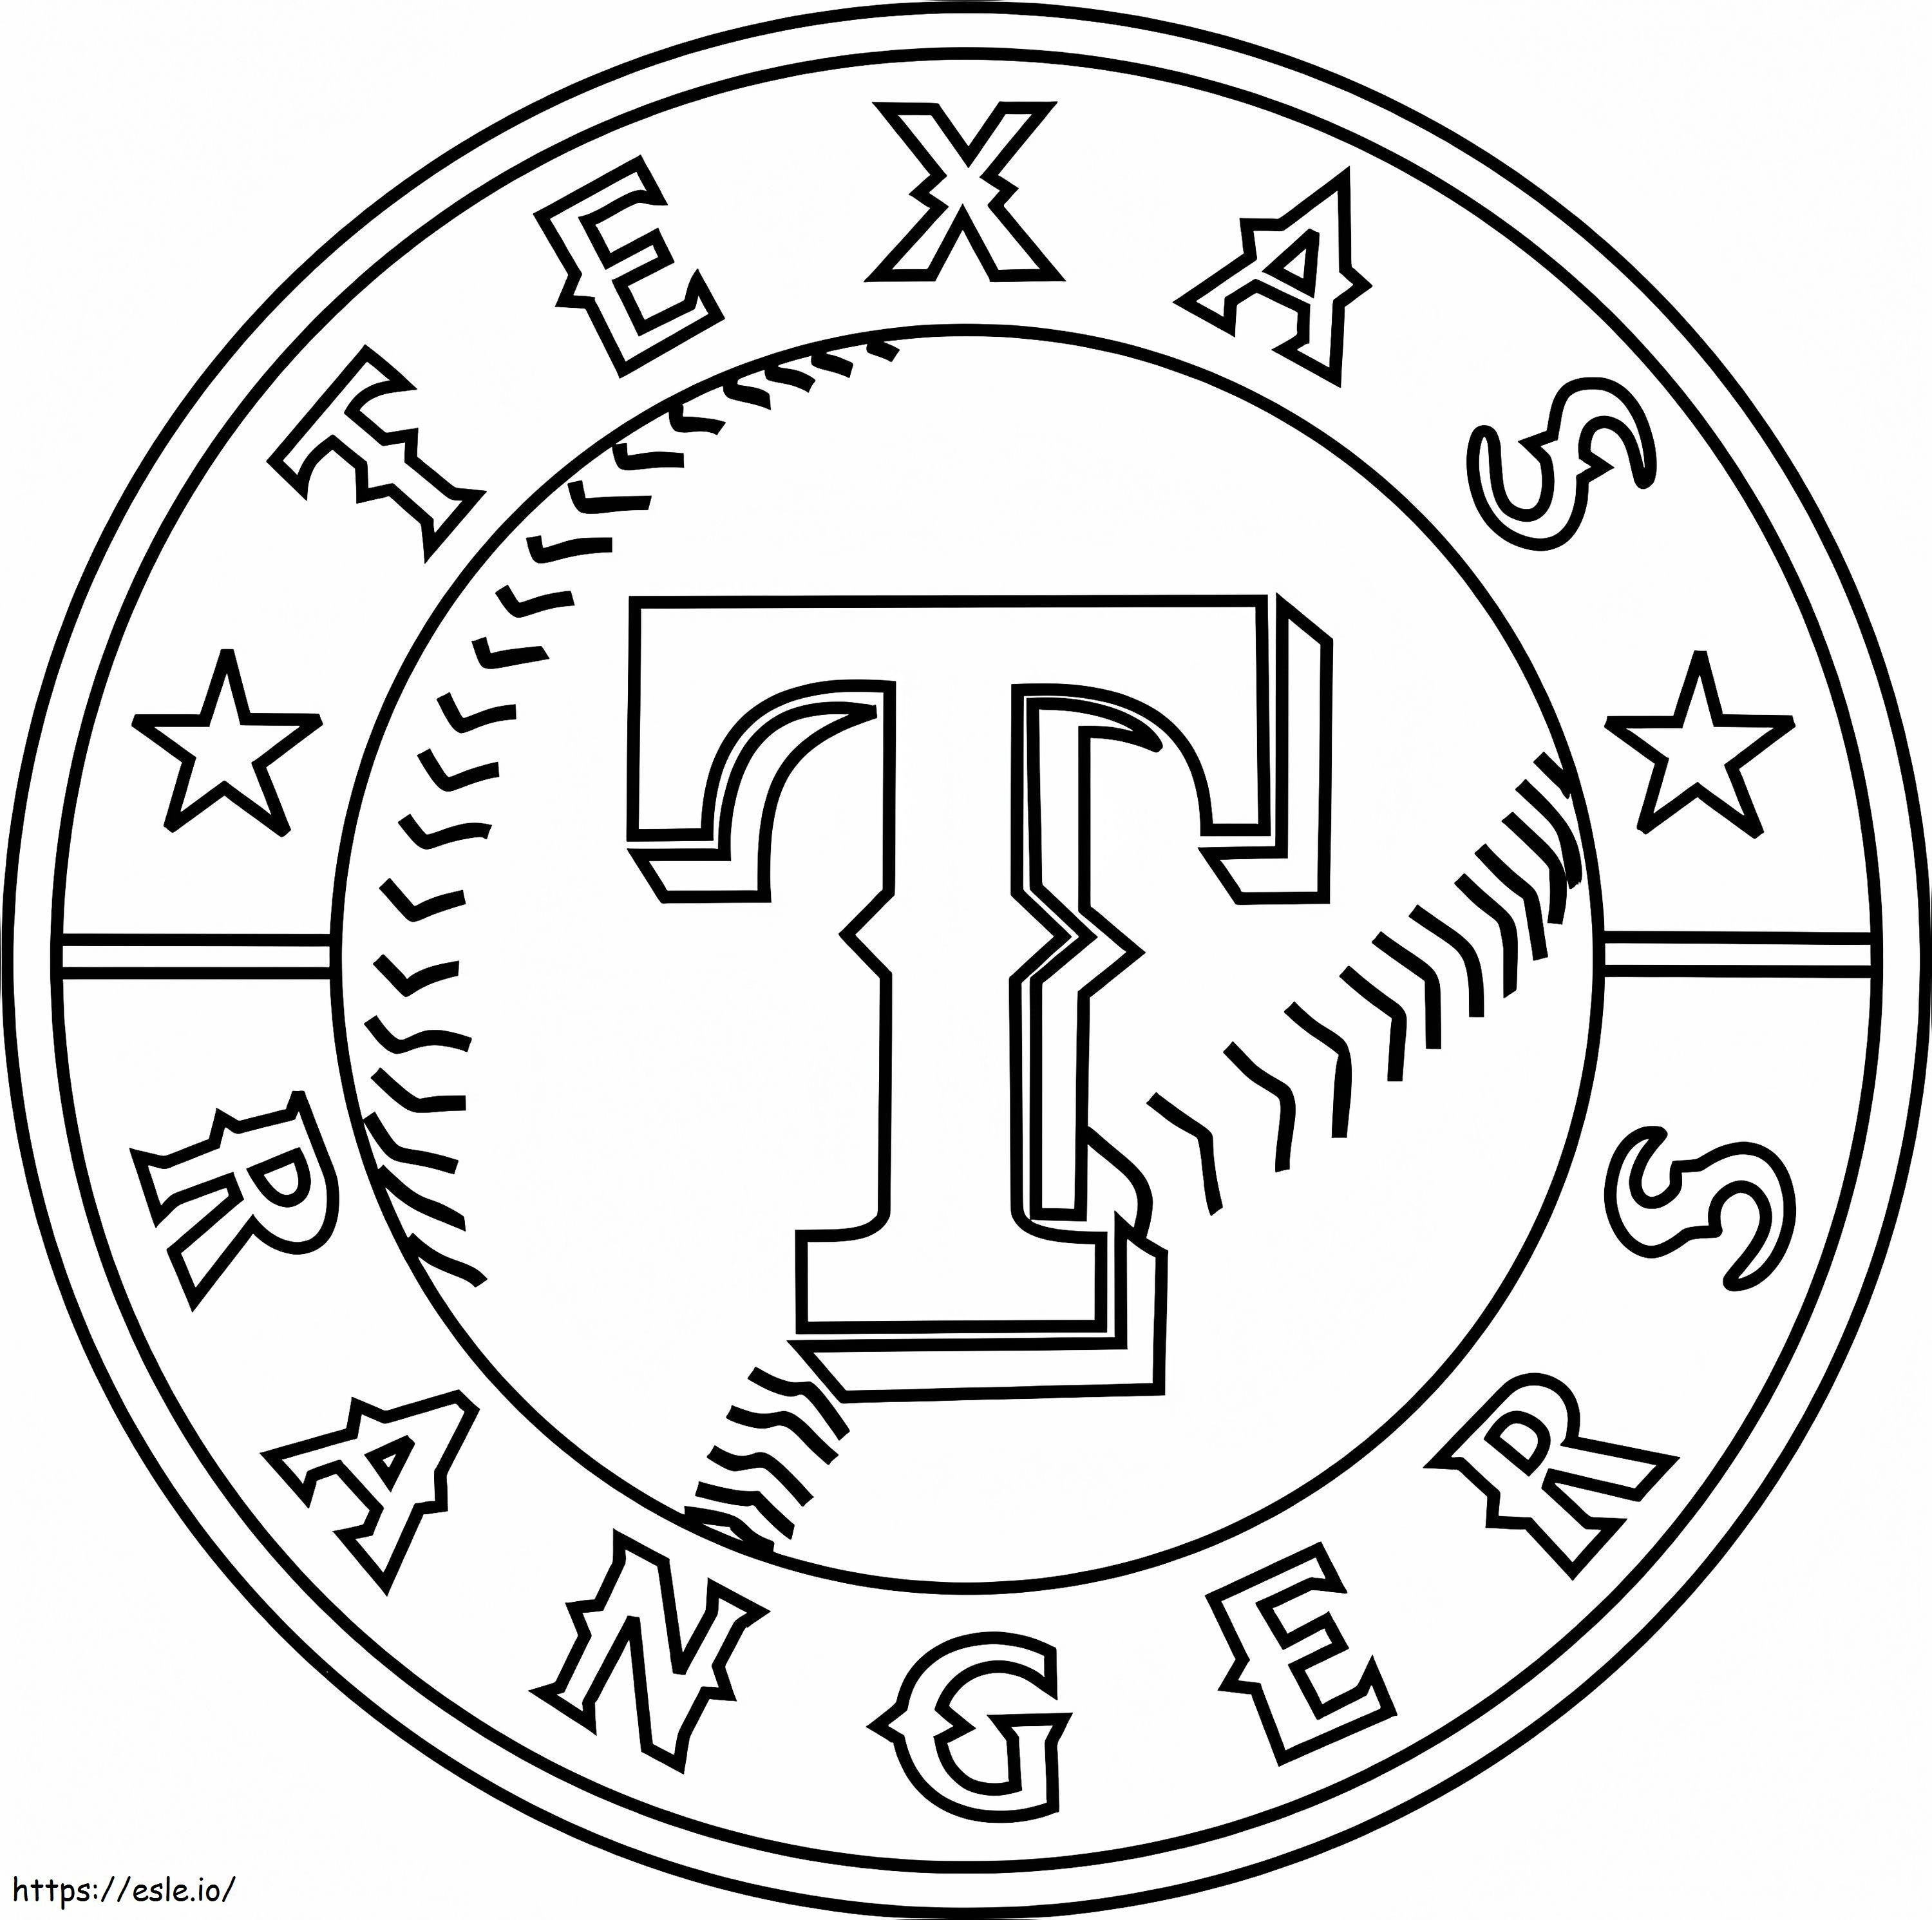 Texas Rangers Logo coloring page